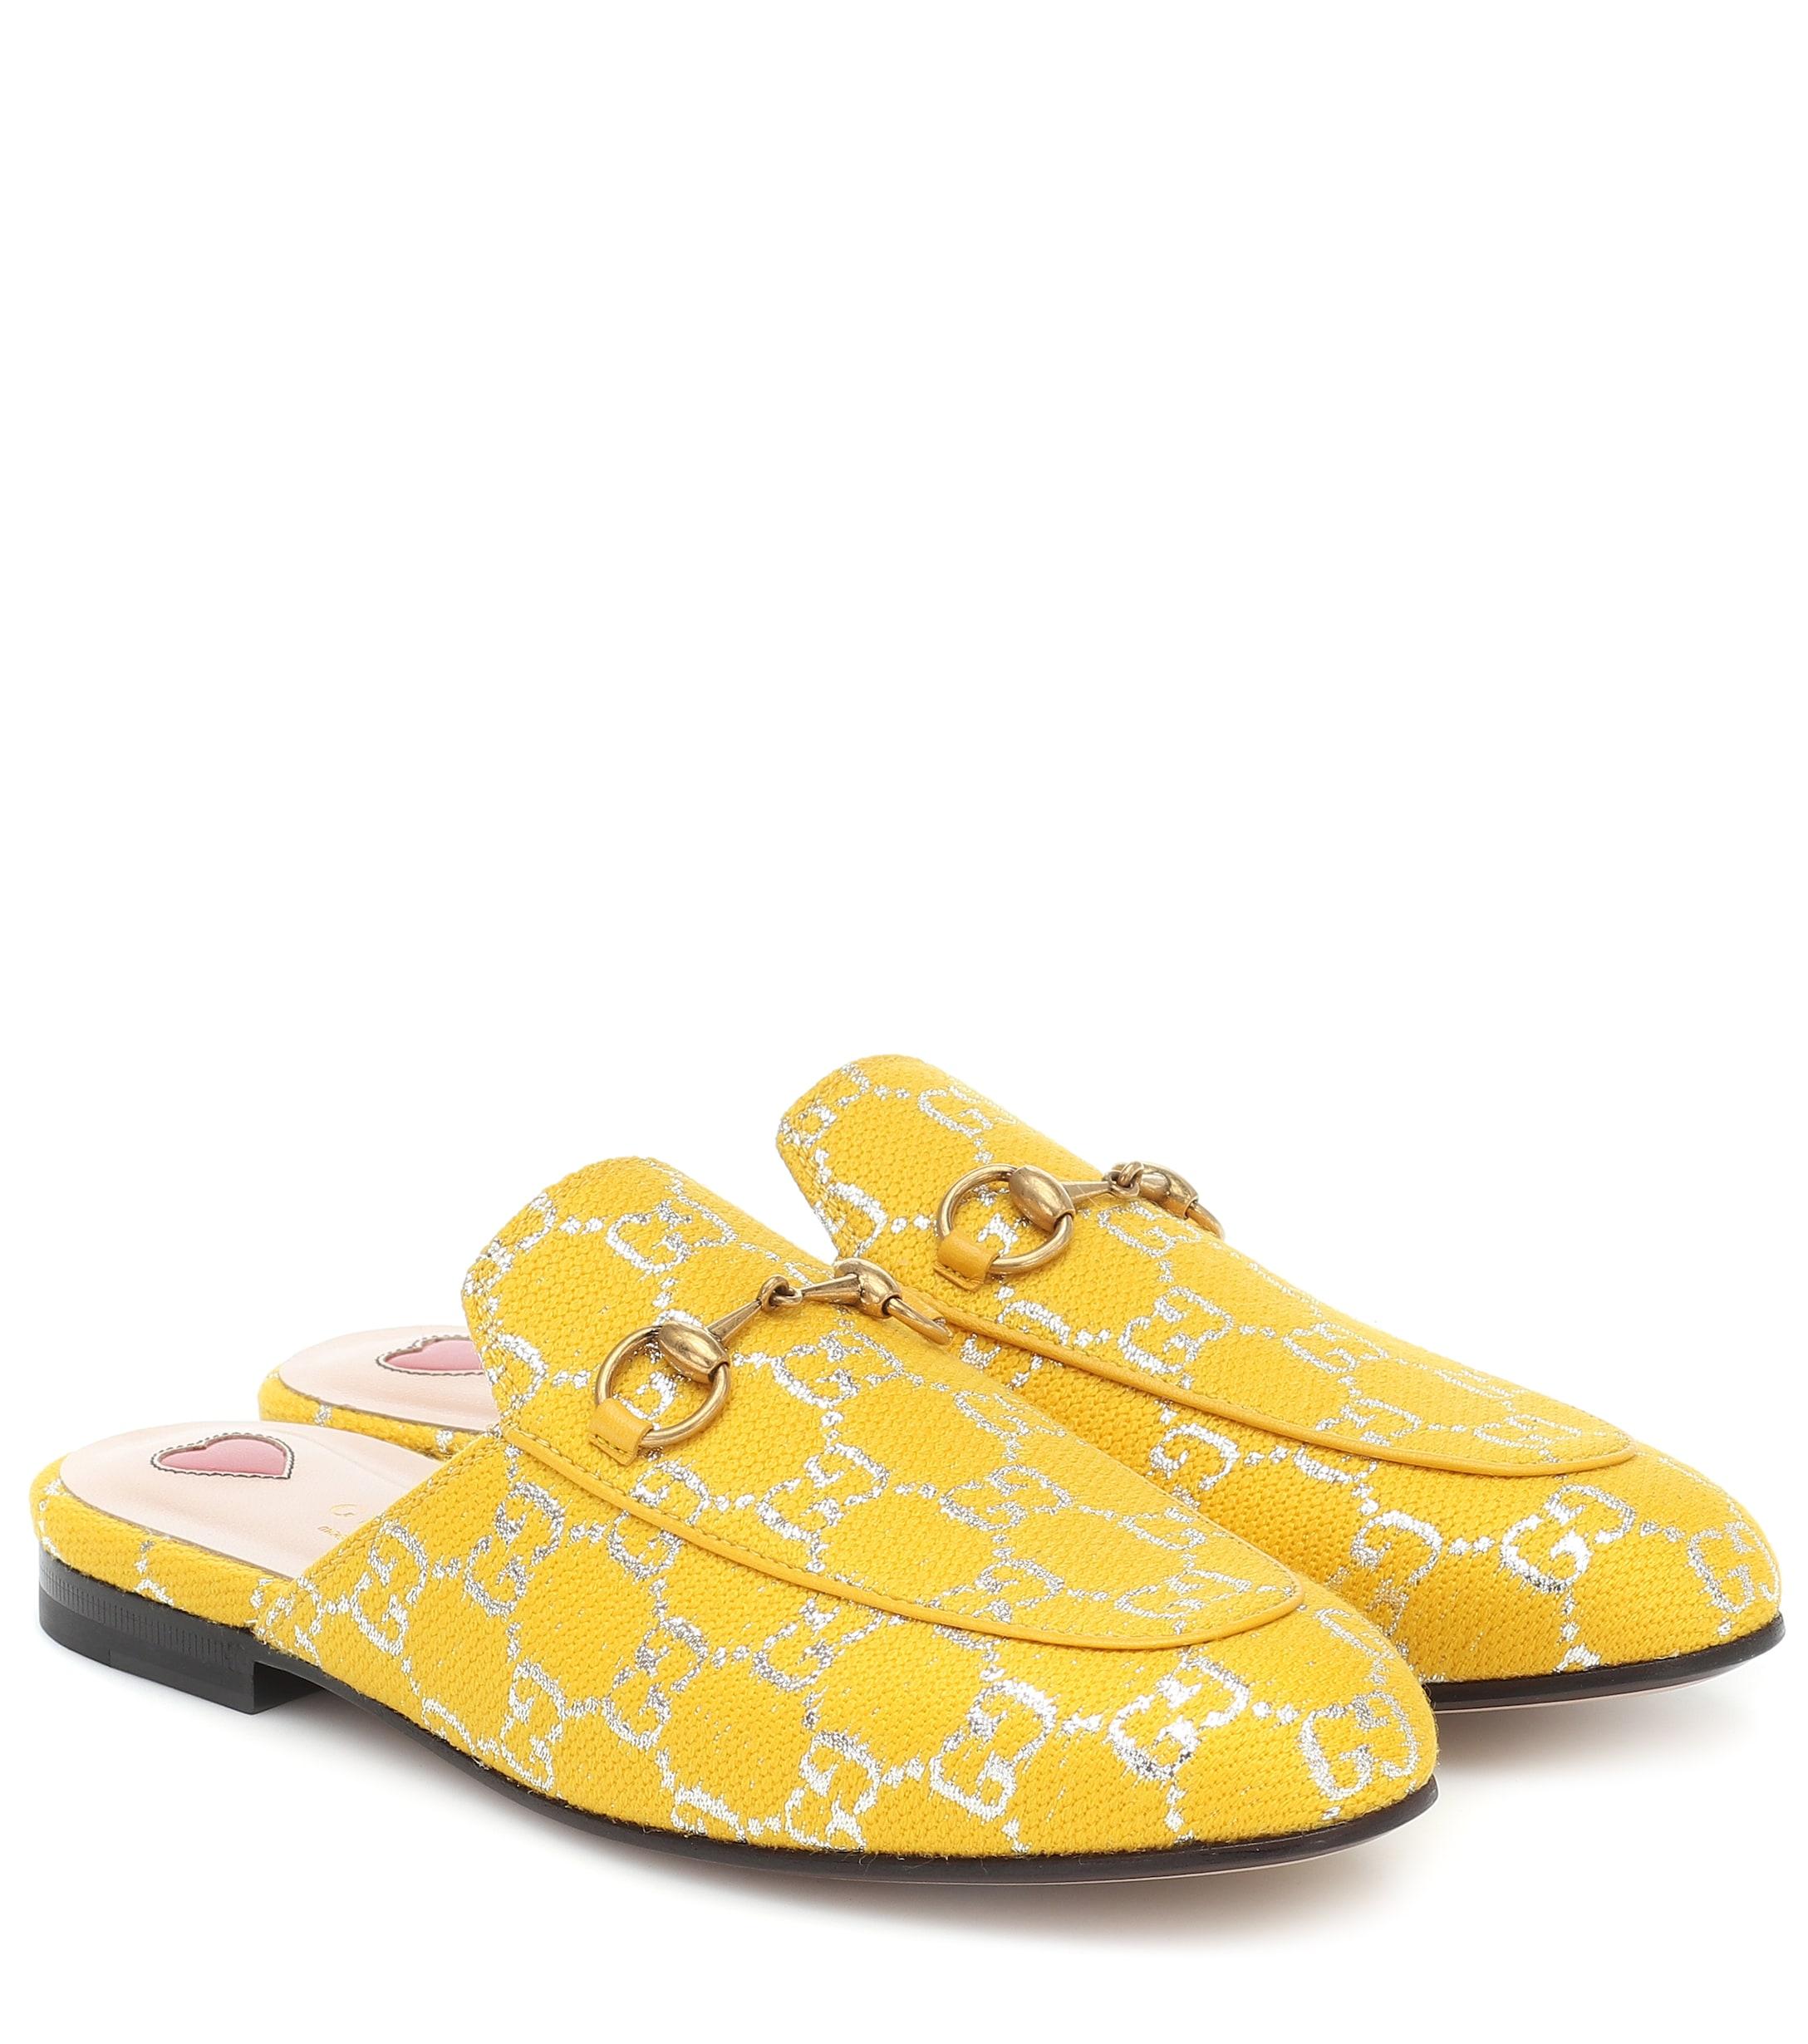 Gucci Leather Princetown GG Supreme Mule in Yellow - Lyst